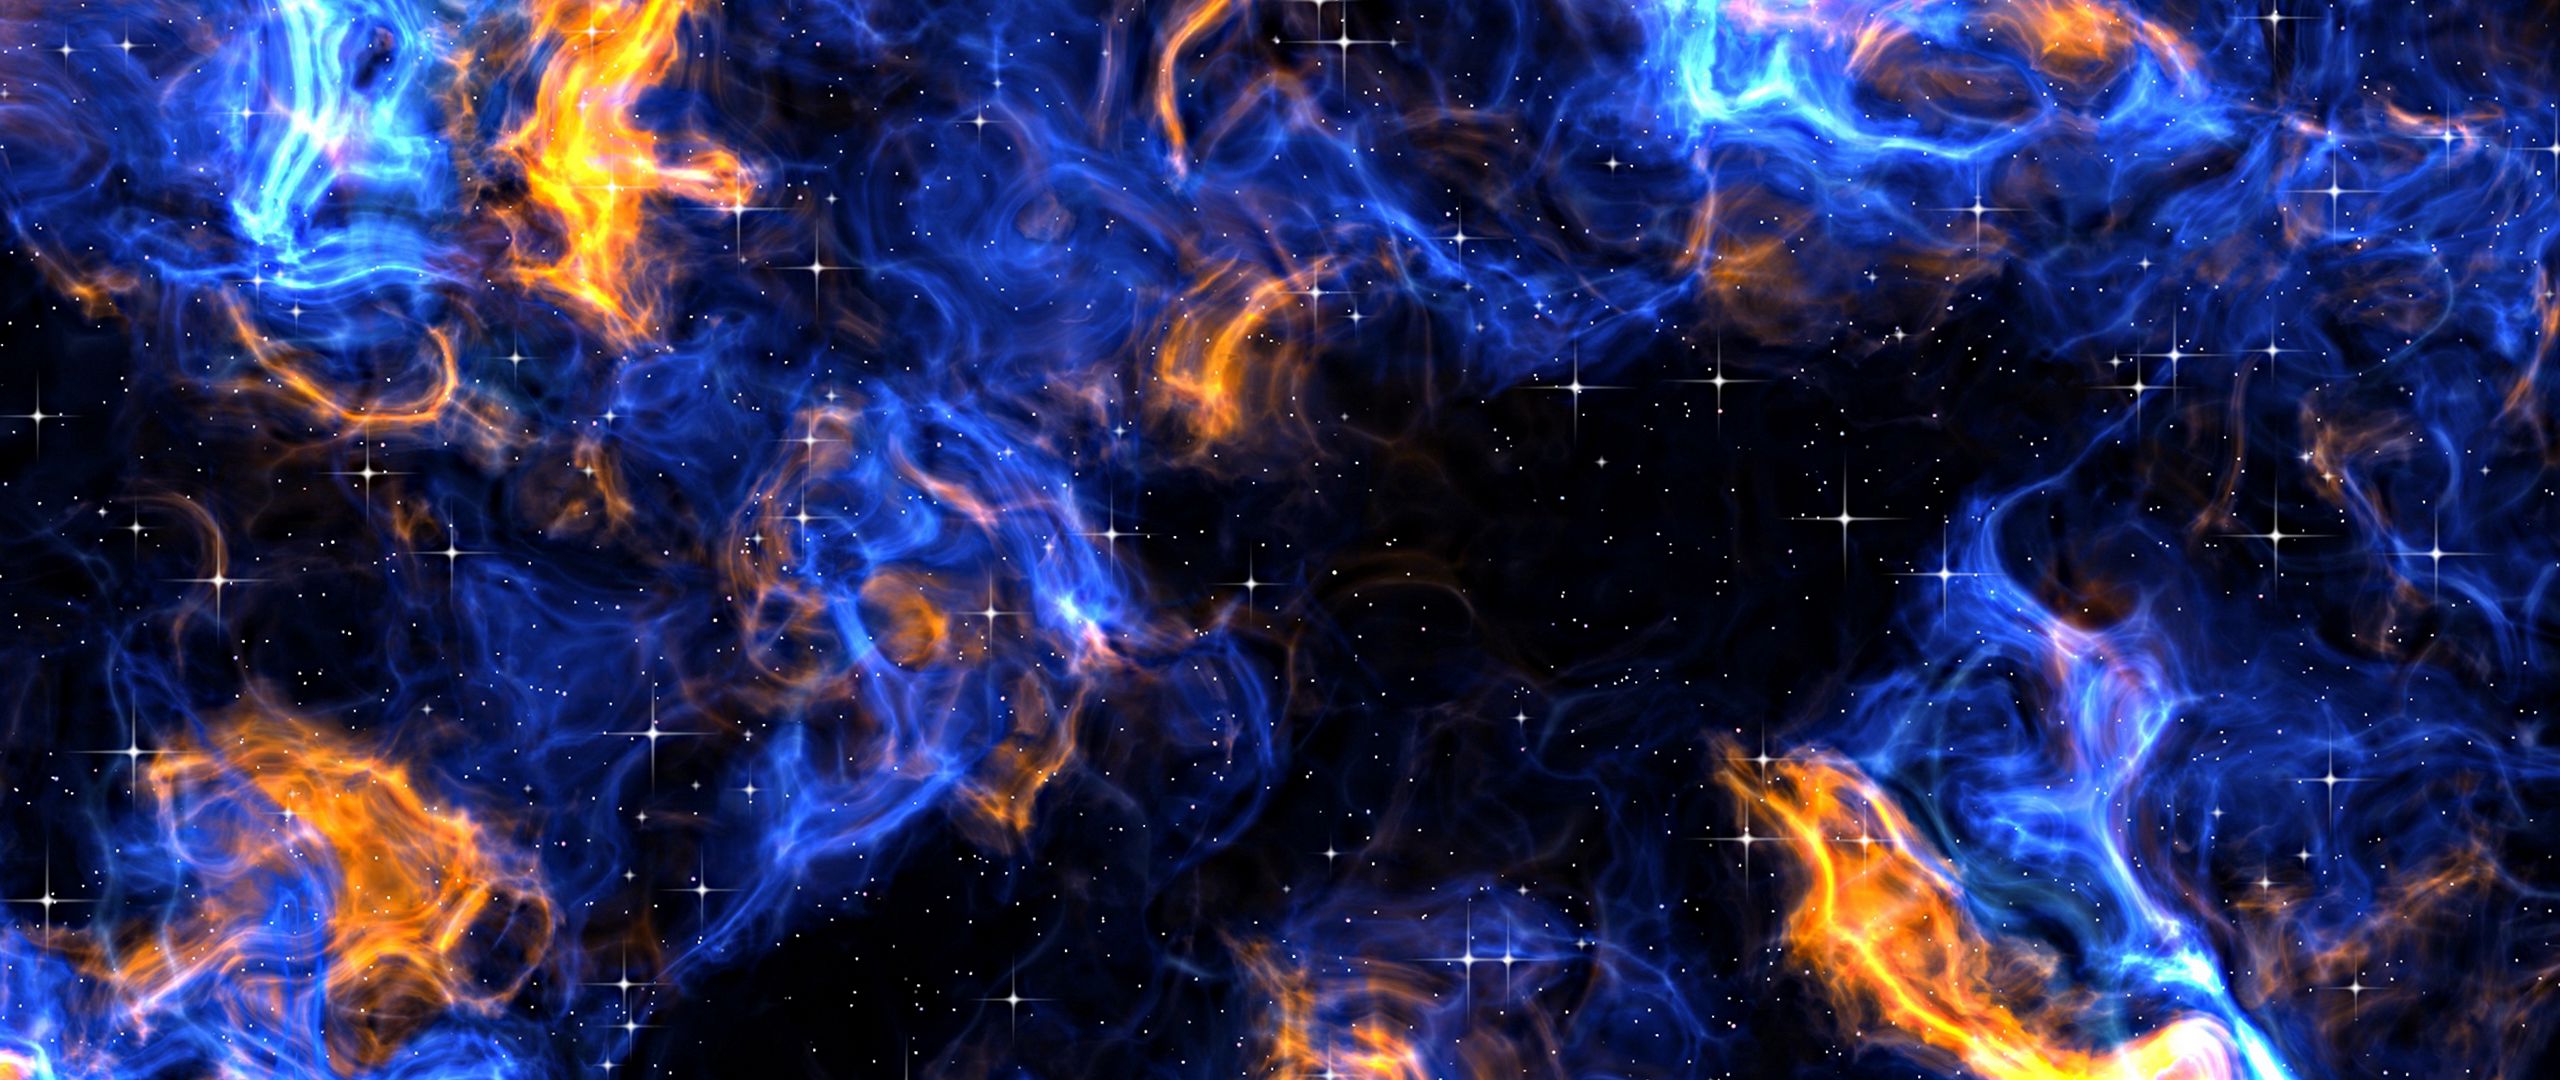 Download wallpaper 2560x1080 stars, art, fire, background dual wide 1080p HD background